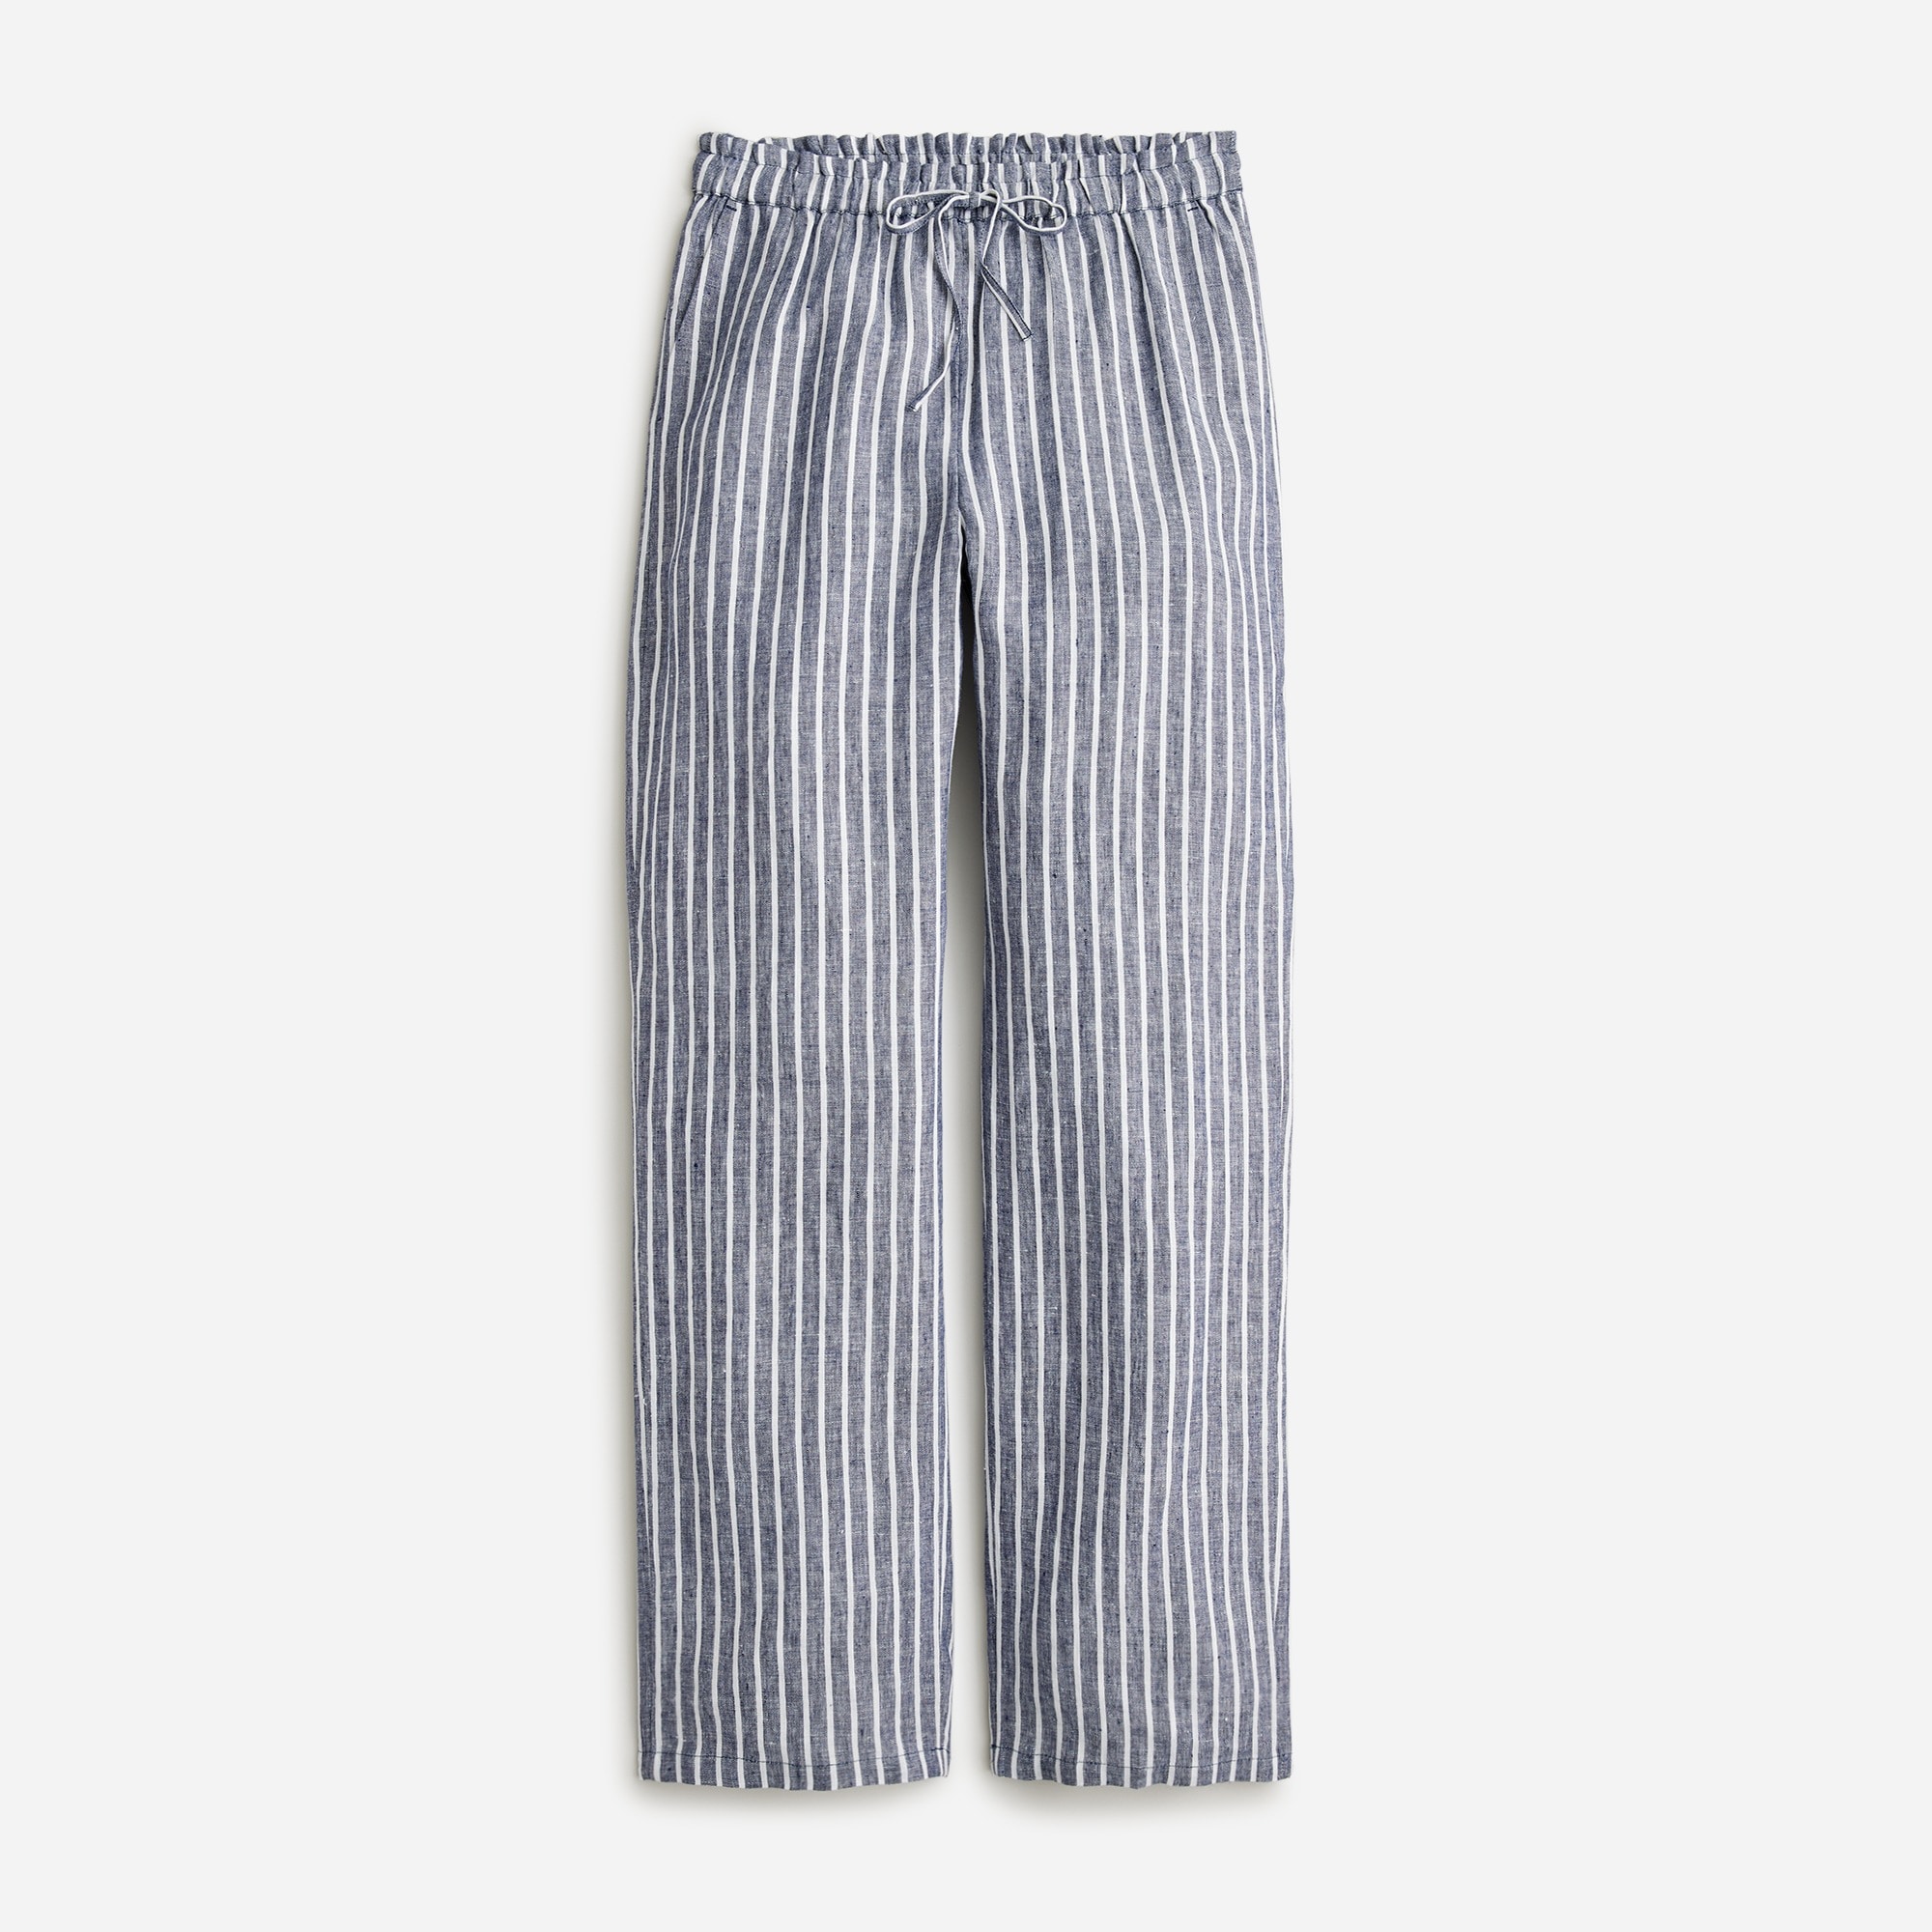  Soleil pant in striped linen